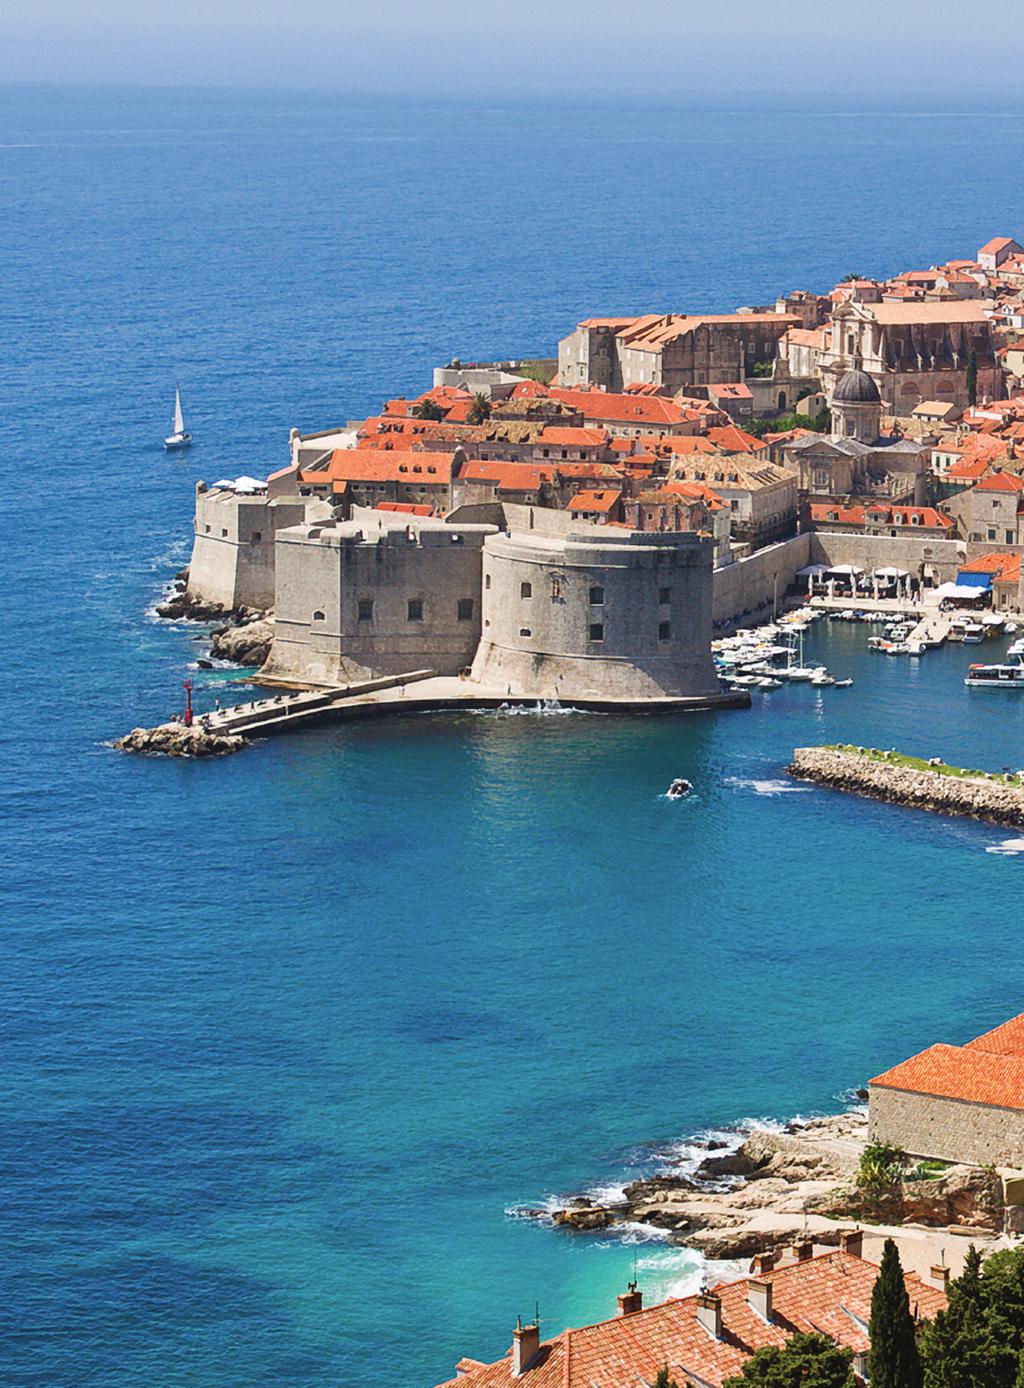 ISLAND TOURS CROATIA CRUISING Welcome to Sun Island Tours Dear Traveller, Sun Island Tours is proud to present our 2019 early release brochure for Croatia Cruising, including our wonderful Croatia